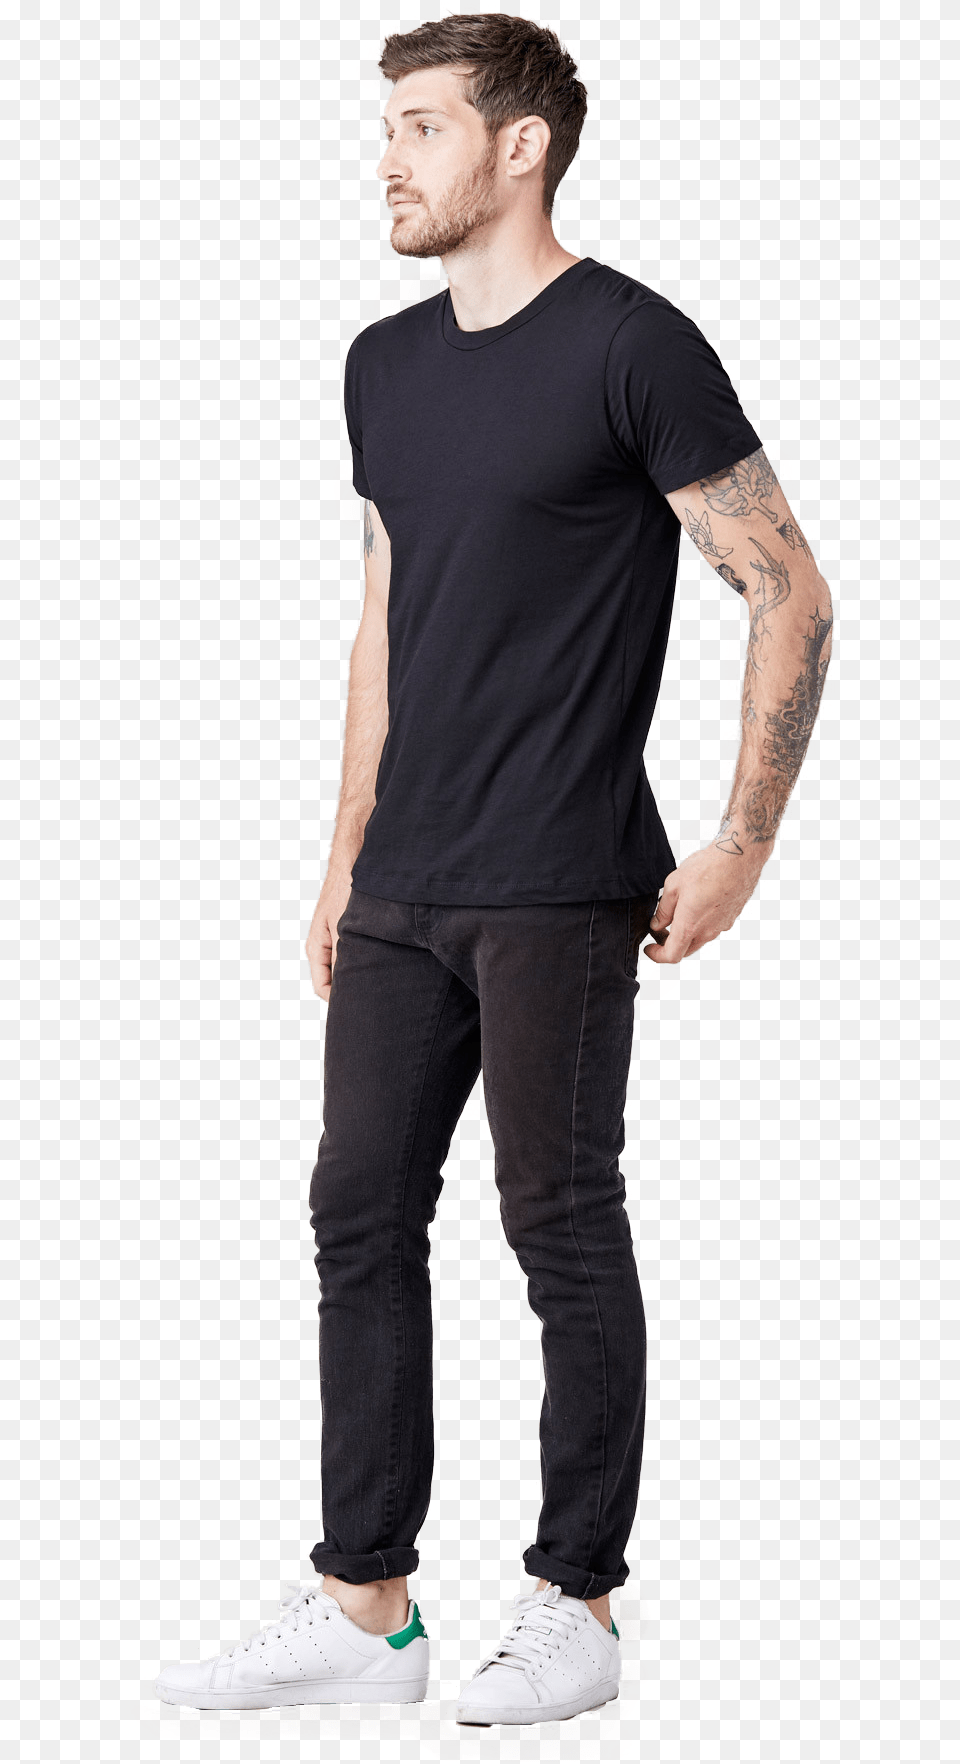 People Images Walking Cut Out People Stand, Tattoo, Sleeve, Skin, Shoe Png